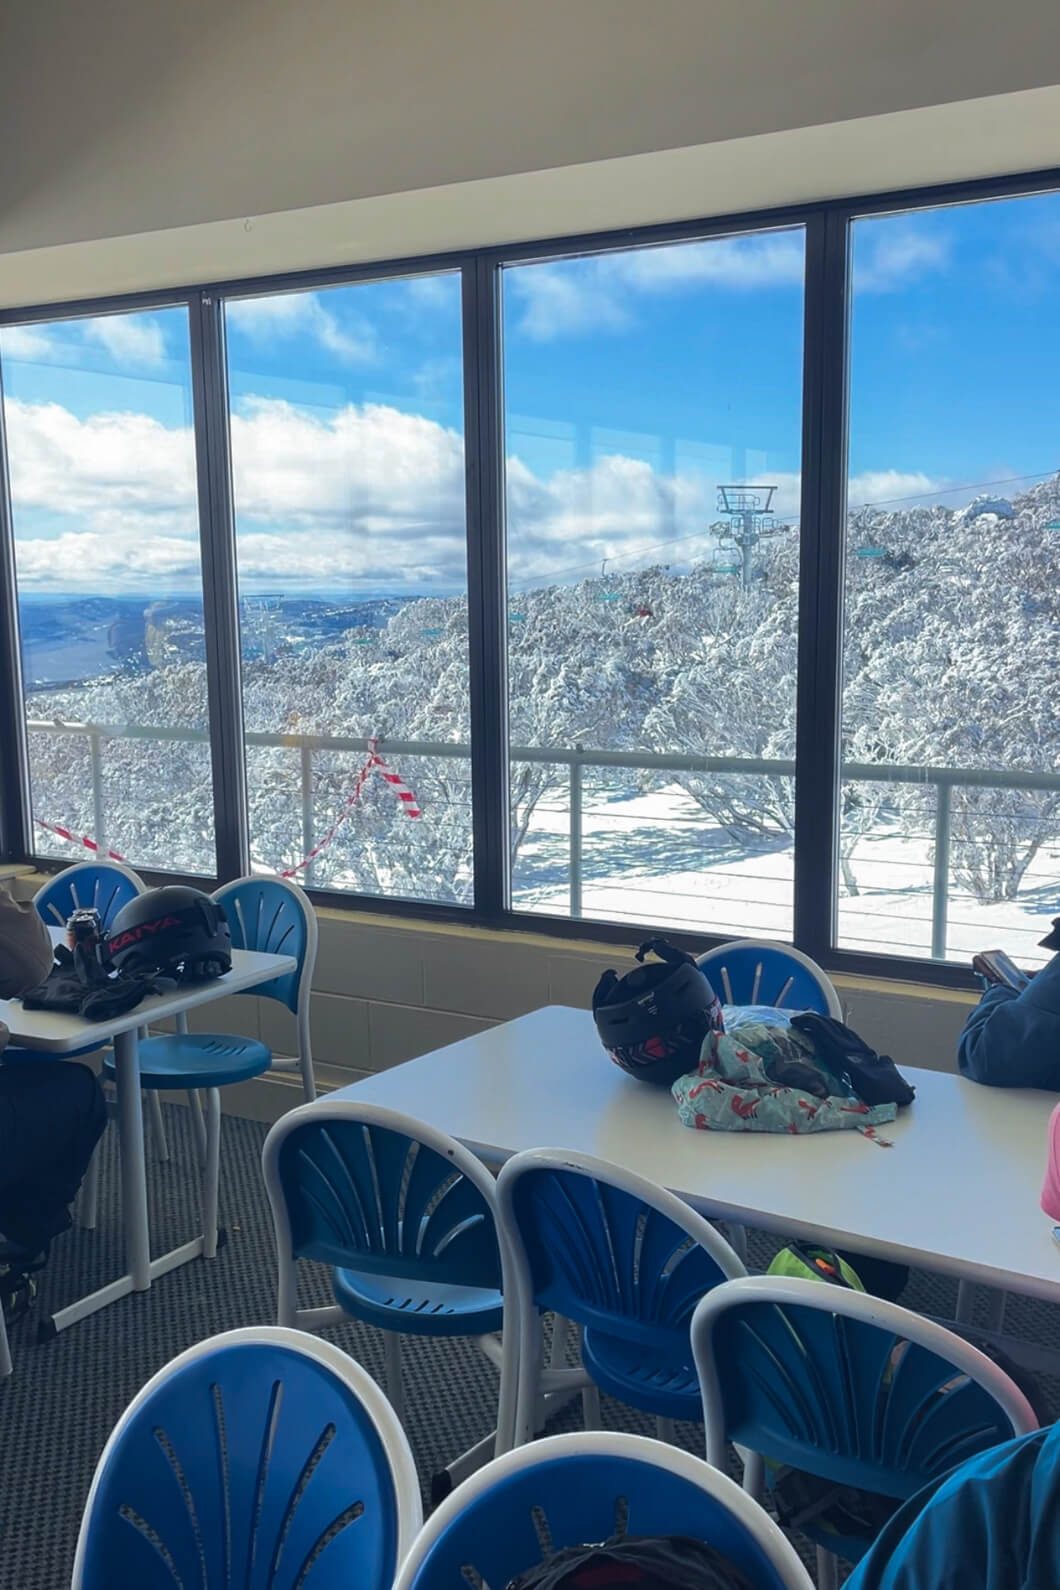 A complete guide to skiing in Perisher